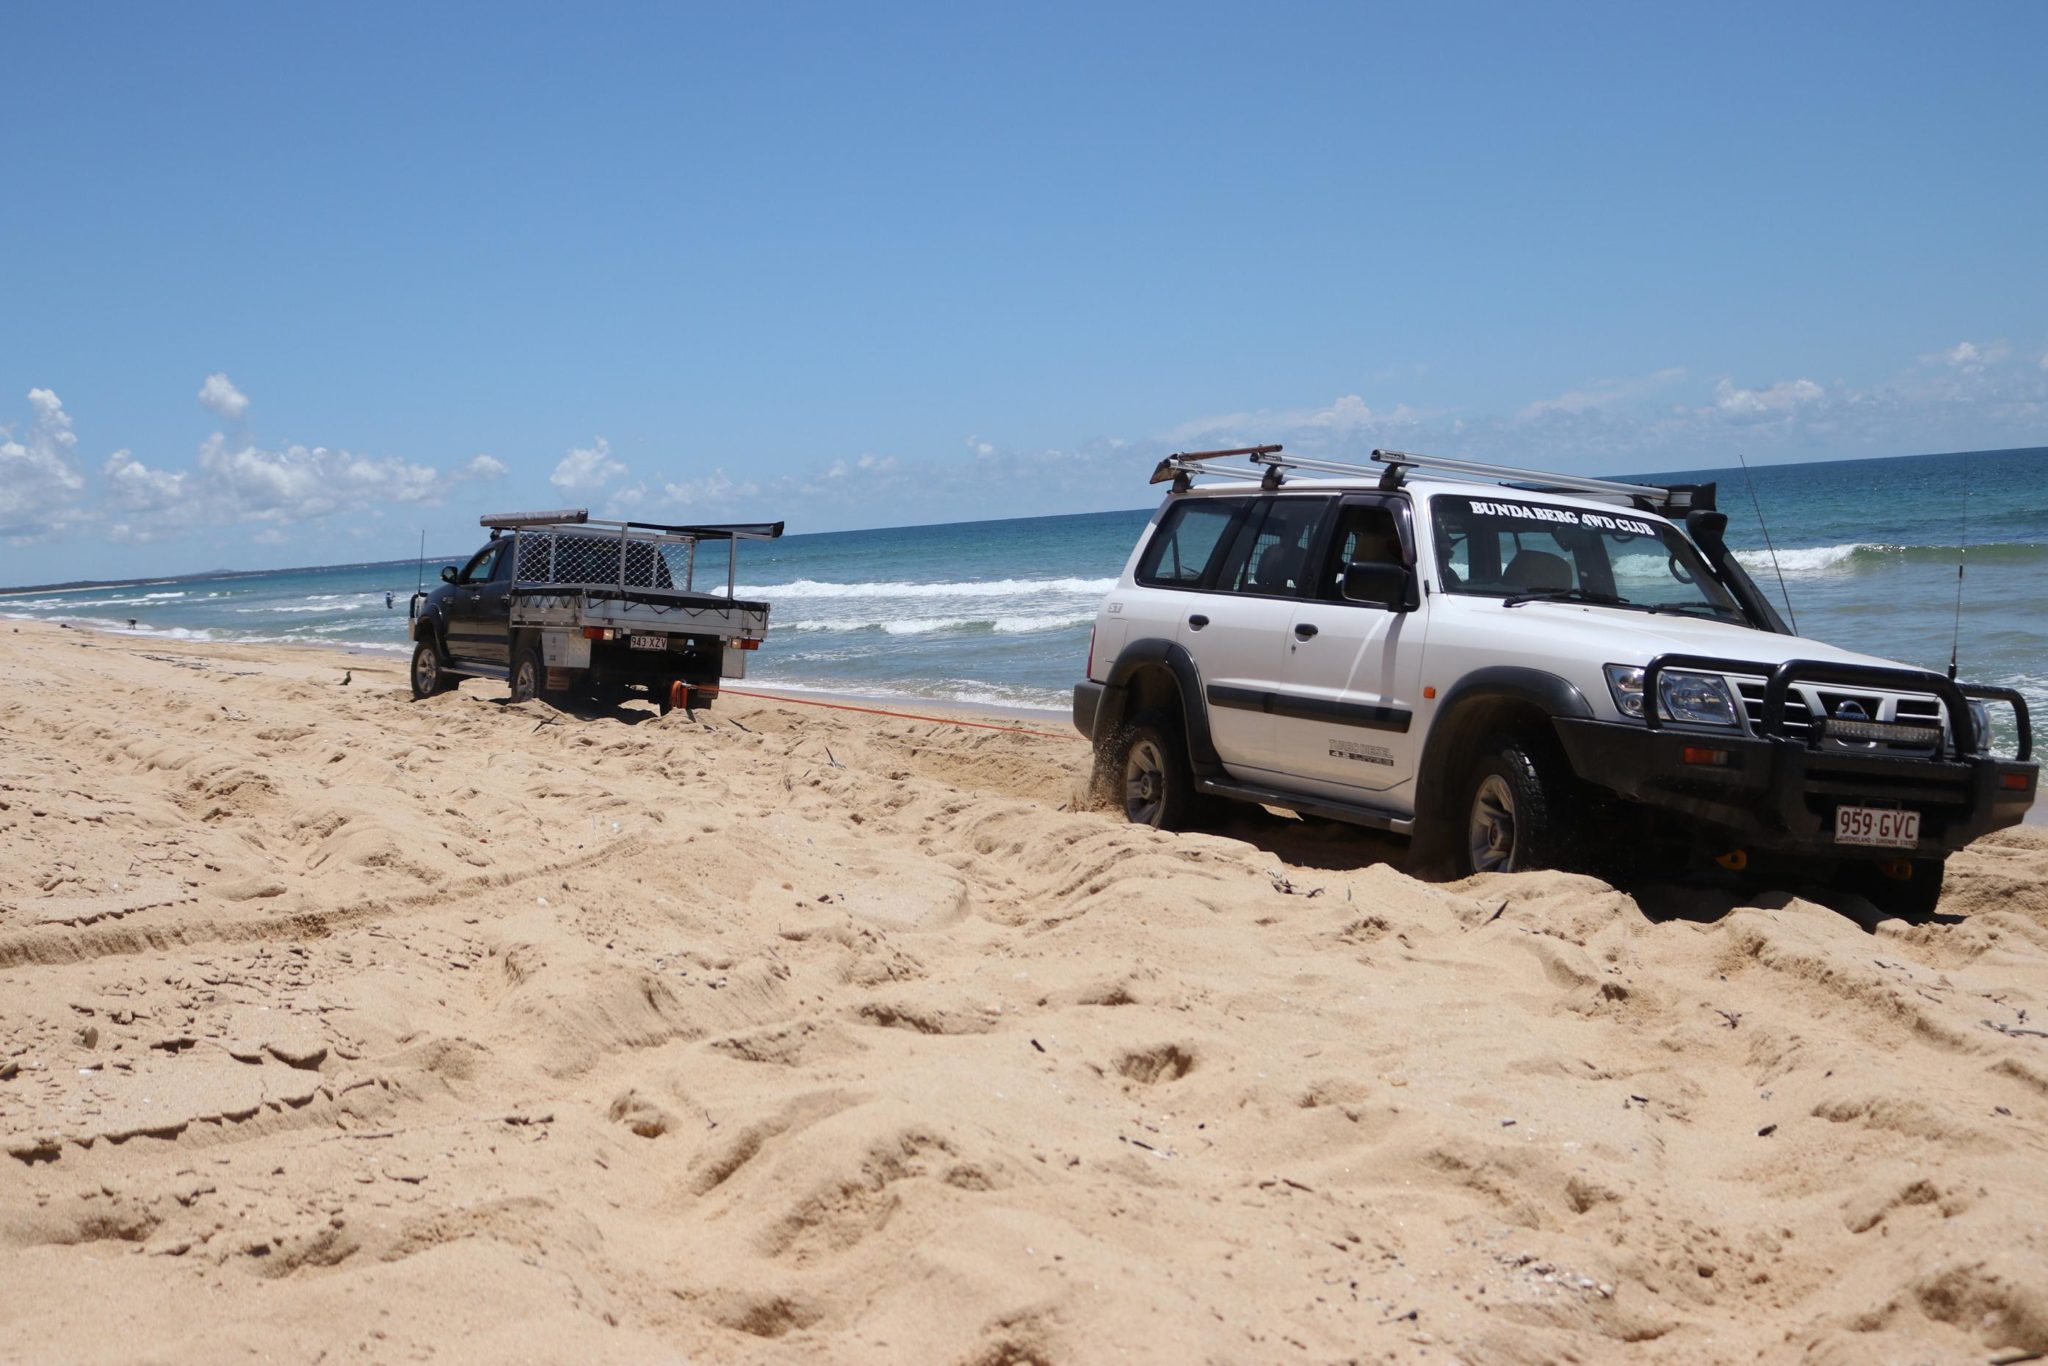 Four Wheel Drive Club practices recovery awareness – Bundaberg Now